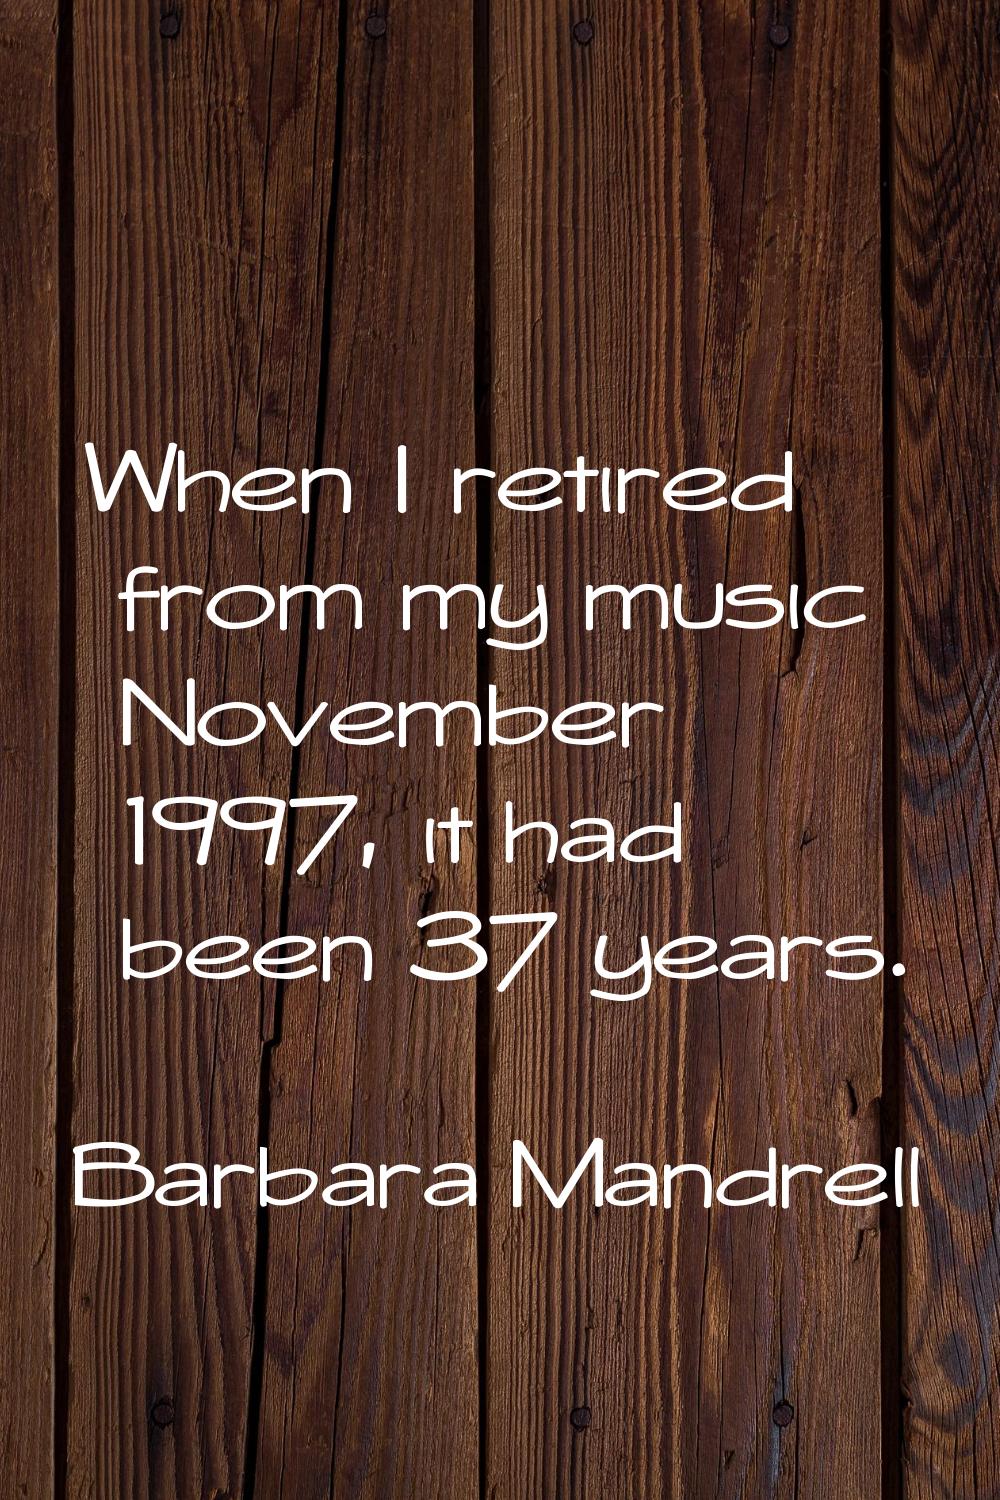 When I retired from my music November 1997, it had been 37 years.